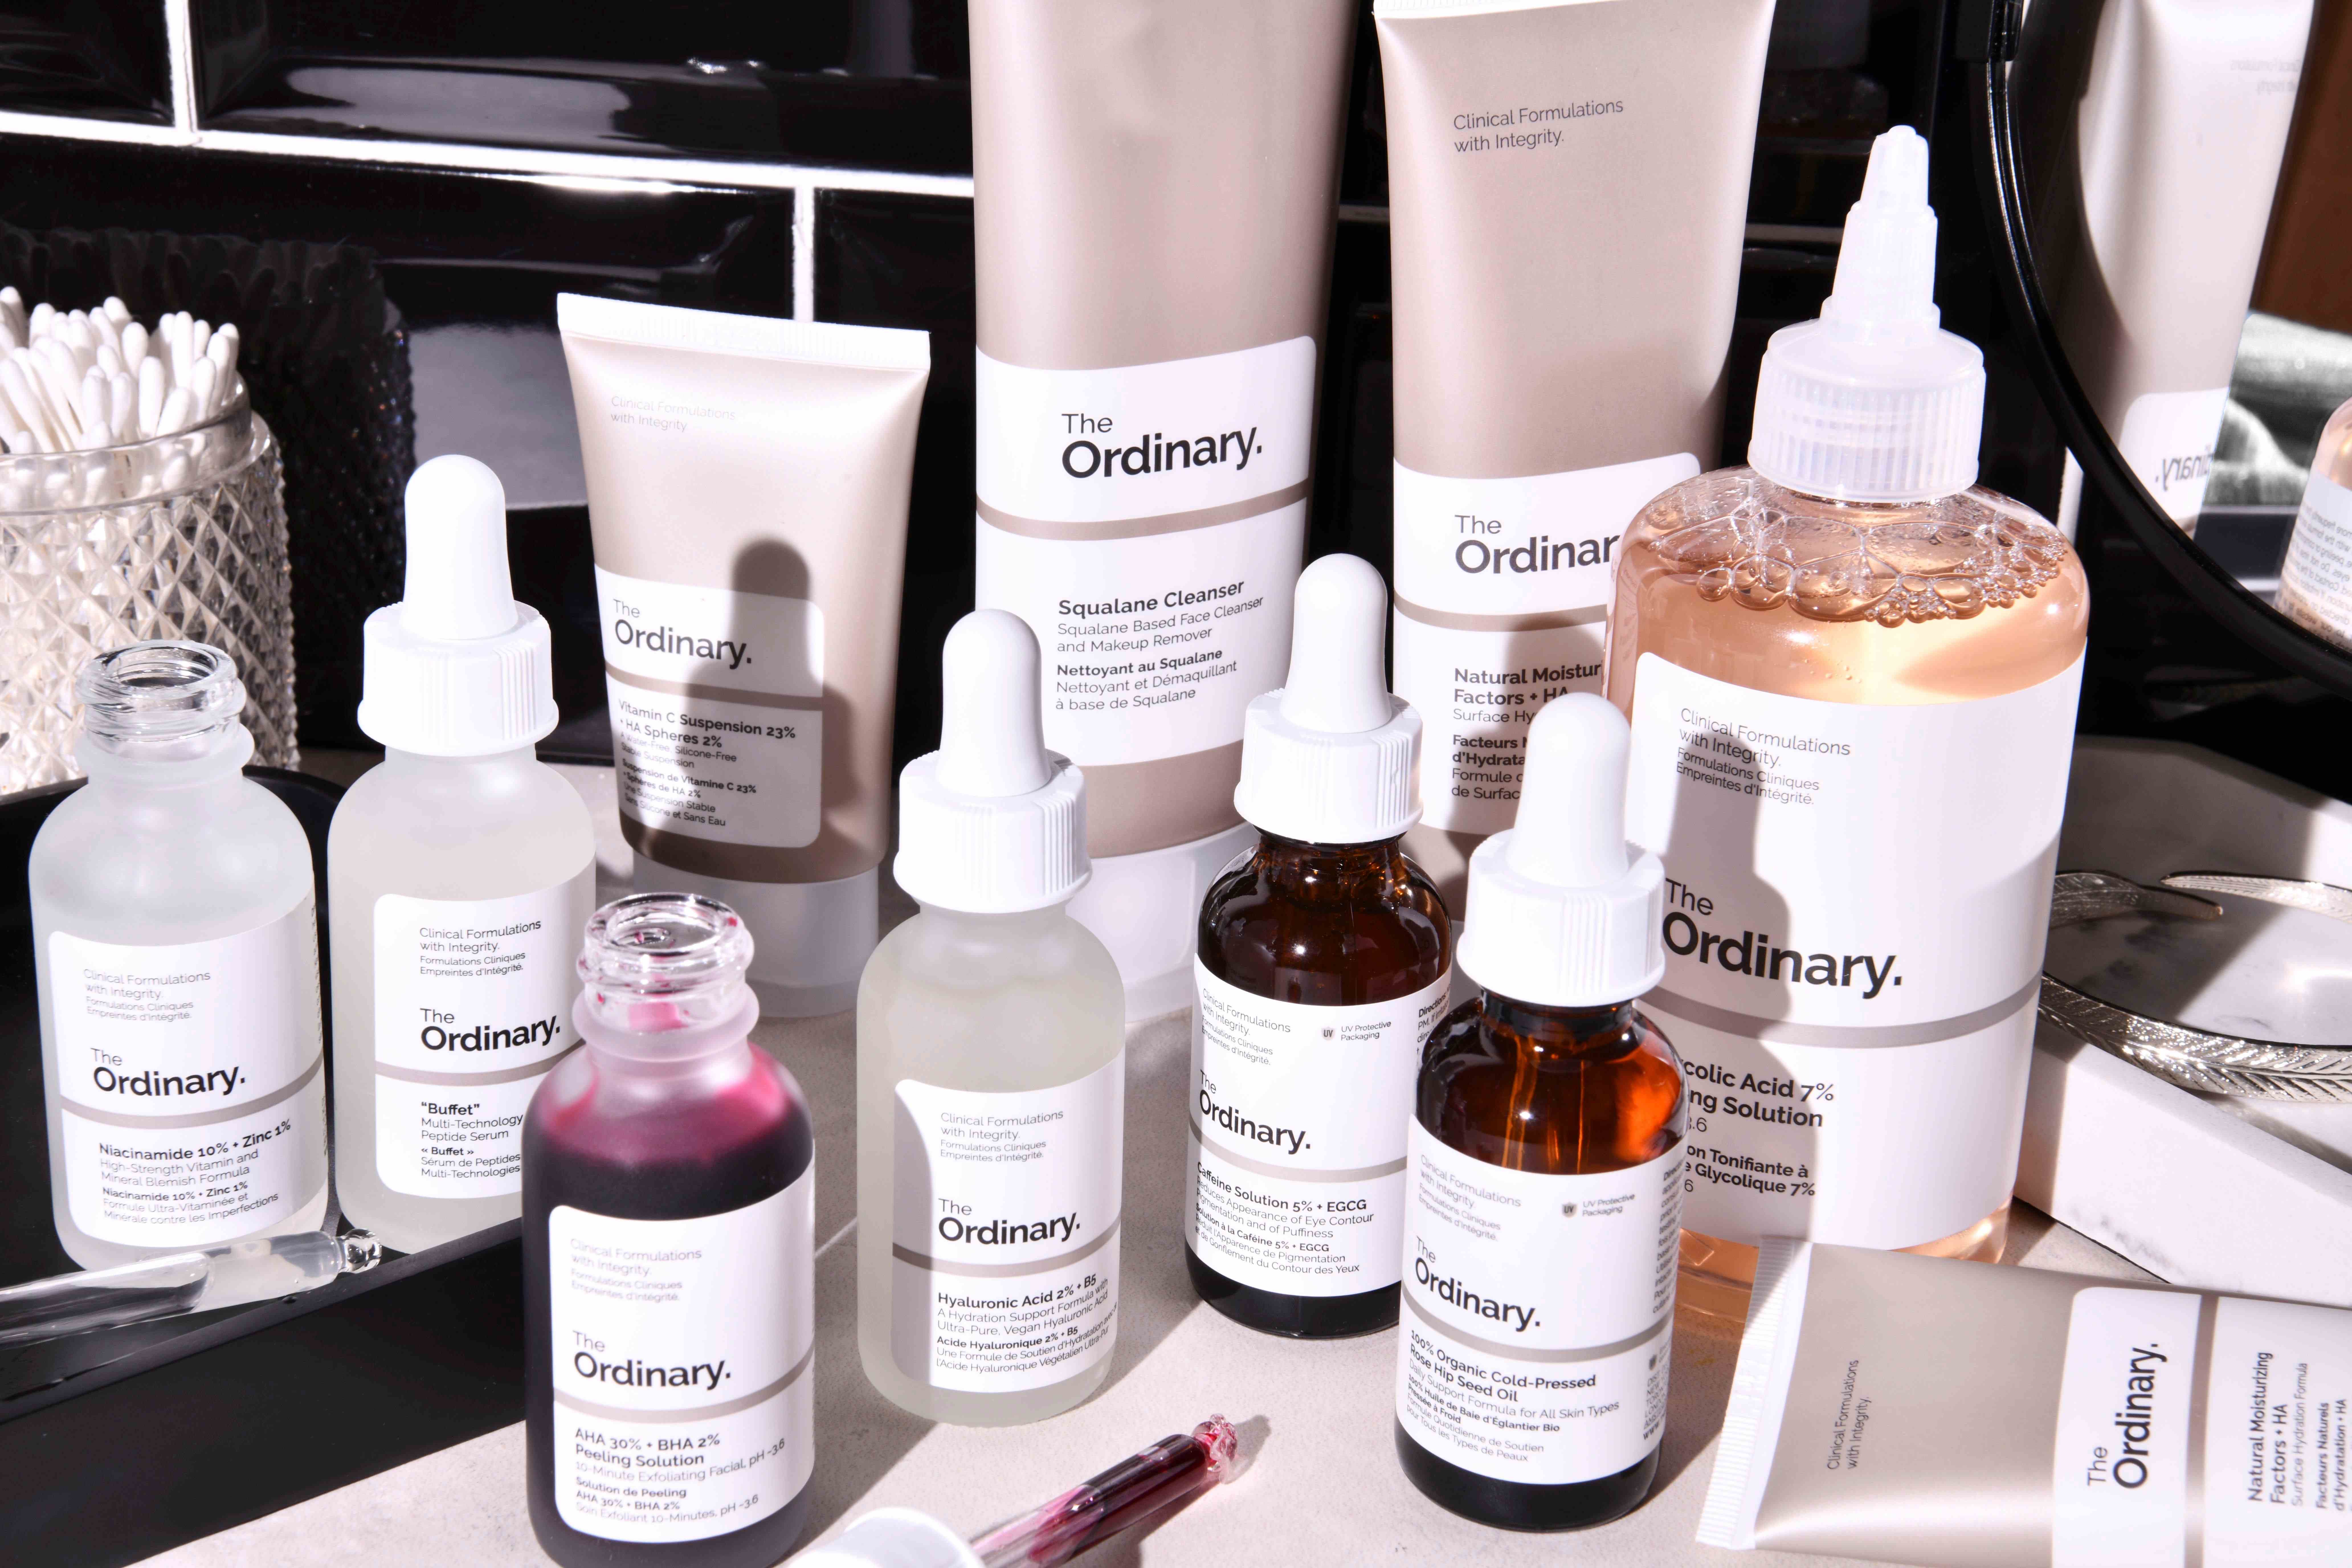 Why These Formulas From The Ordinary Always Sell Out